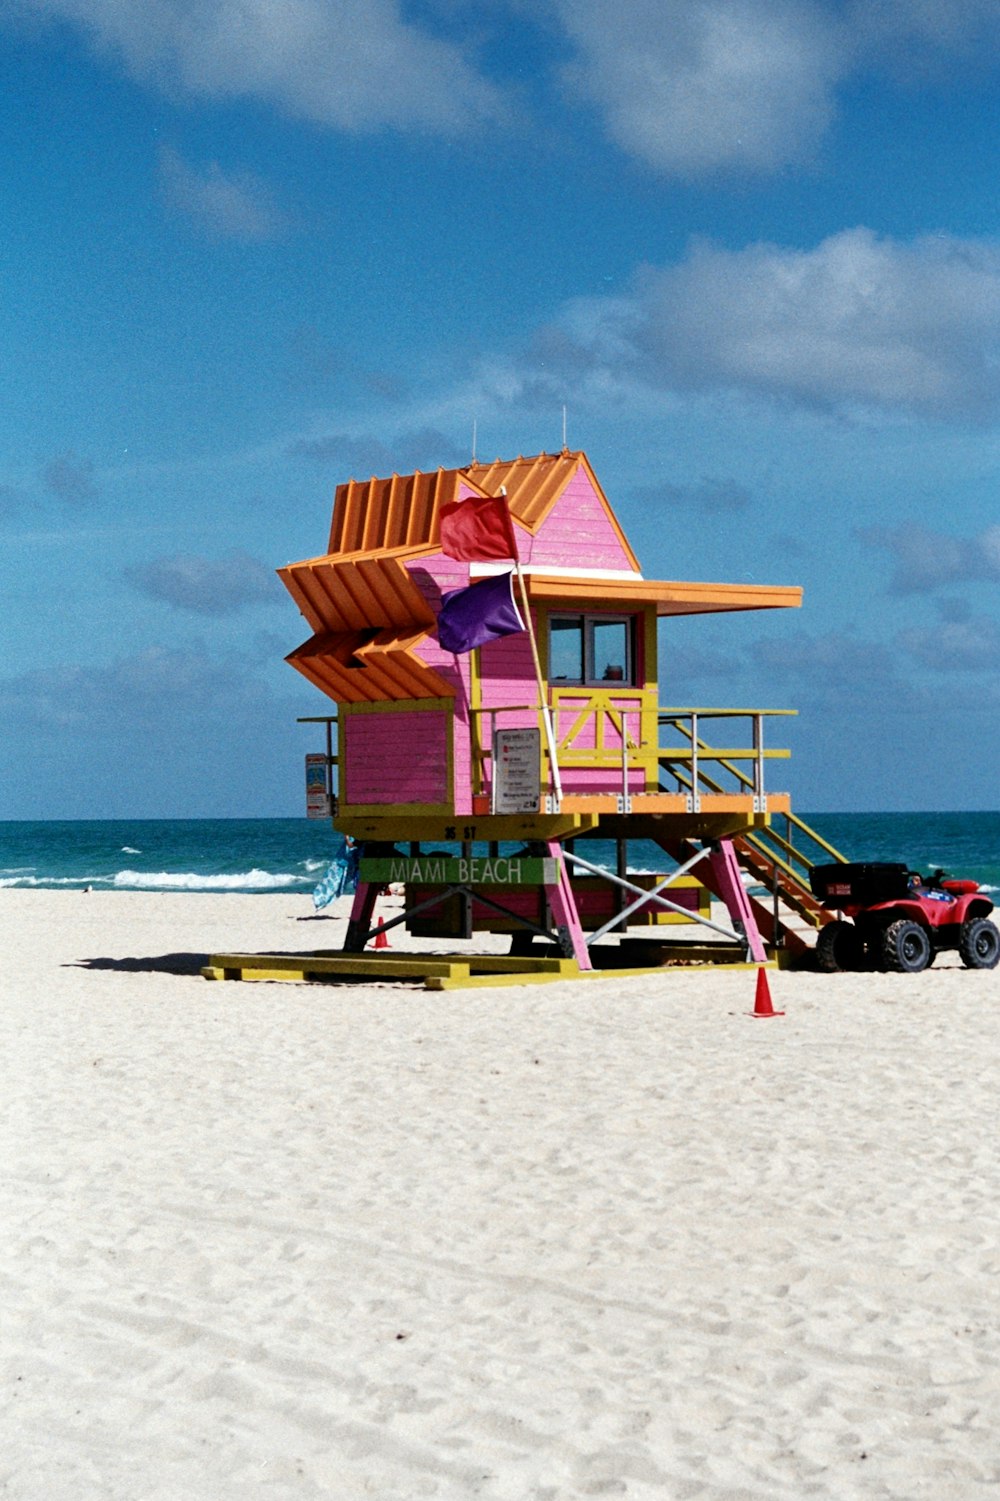 brown wooden lifeguard house on beach shore during daytime